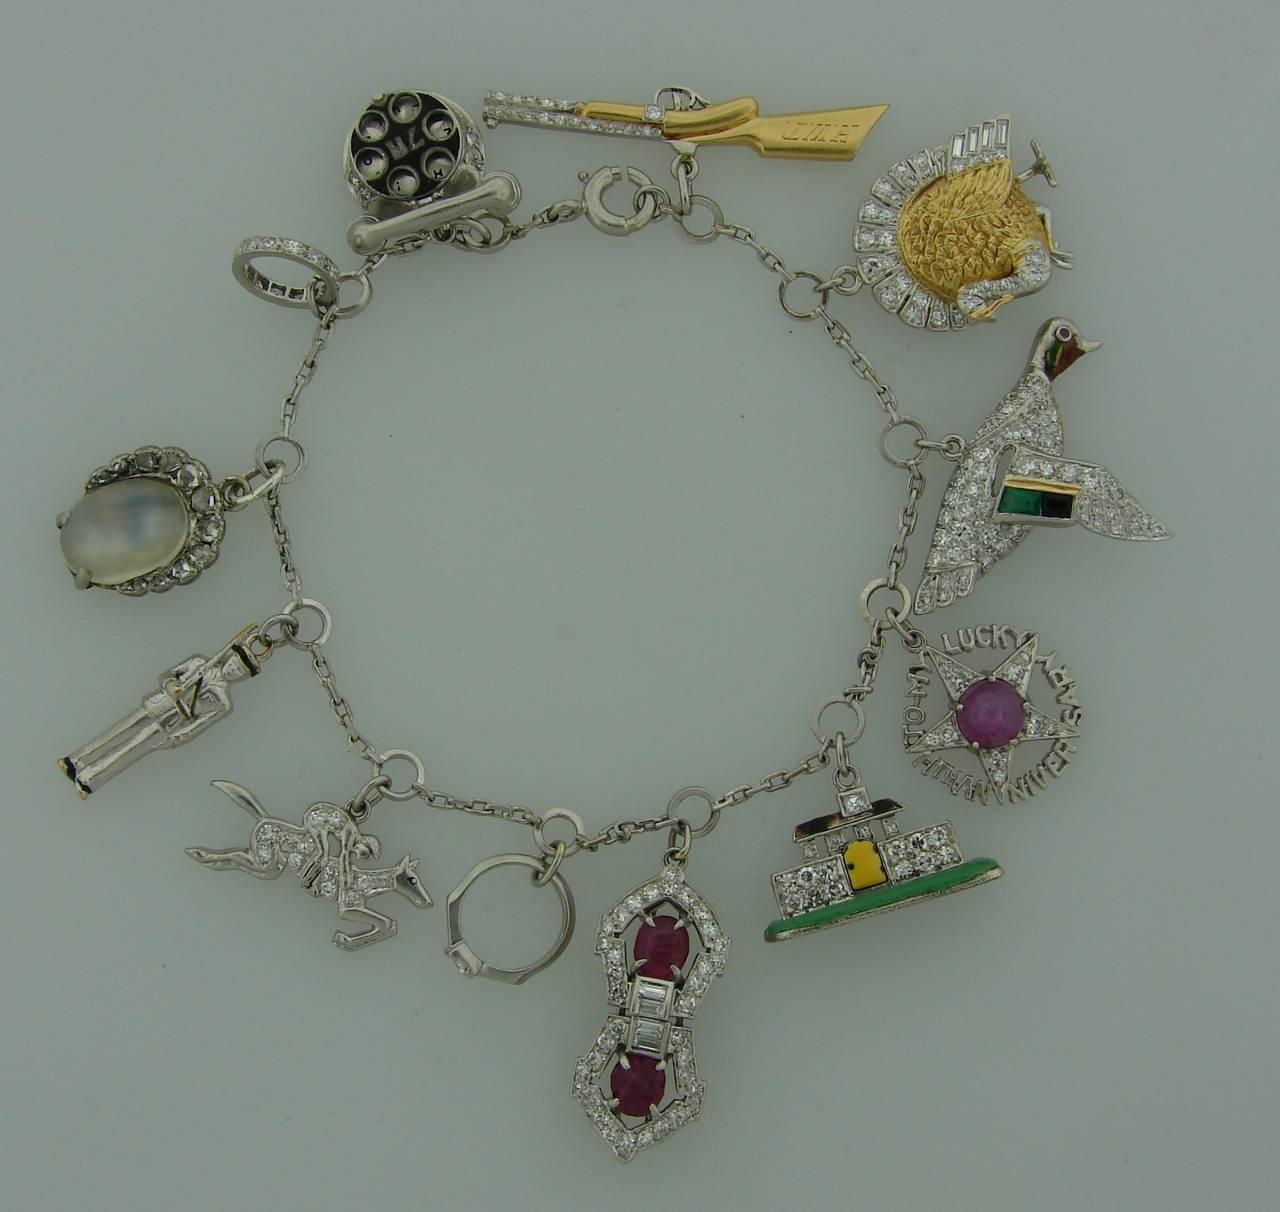 Amazing charm bracelet - unique and fun as every charm is a masterpiece and tells a story! - the rifle, the turkey, the engagement ring, the wedding band, 